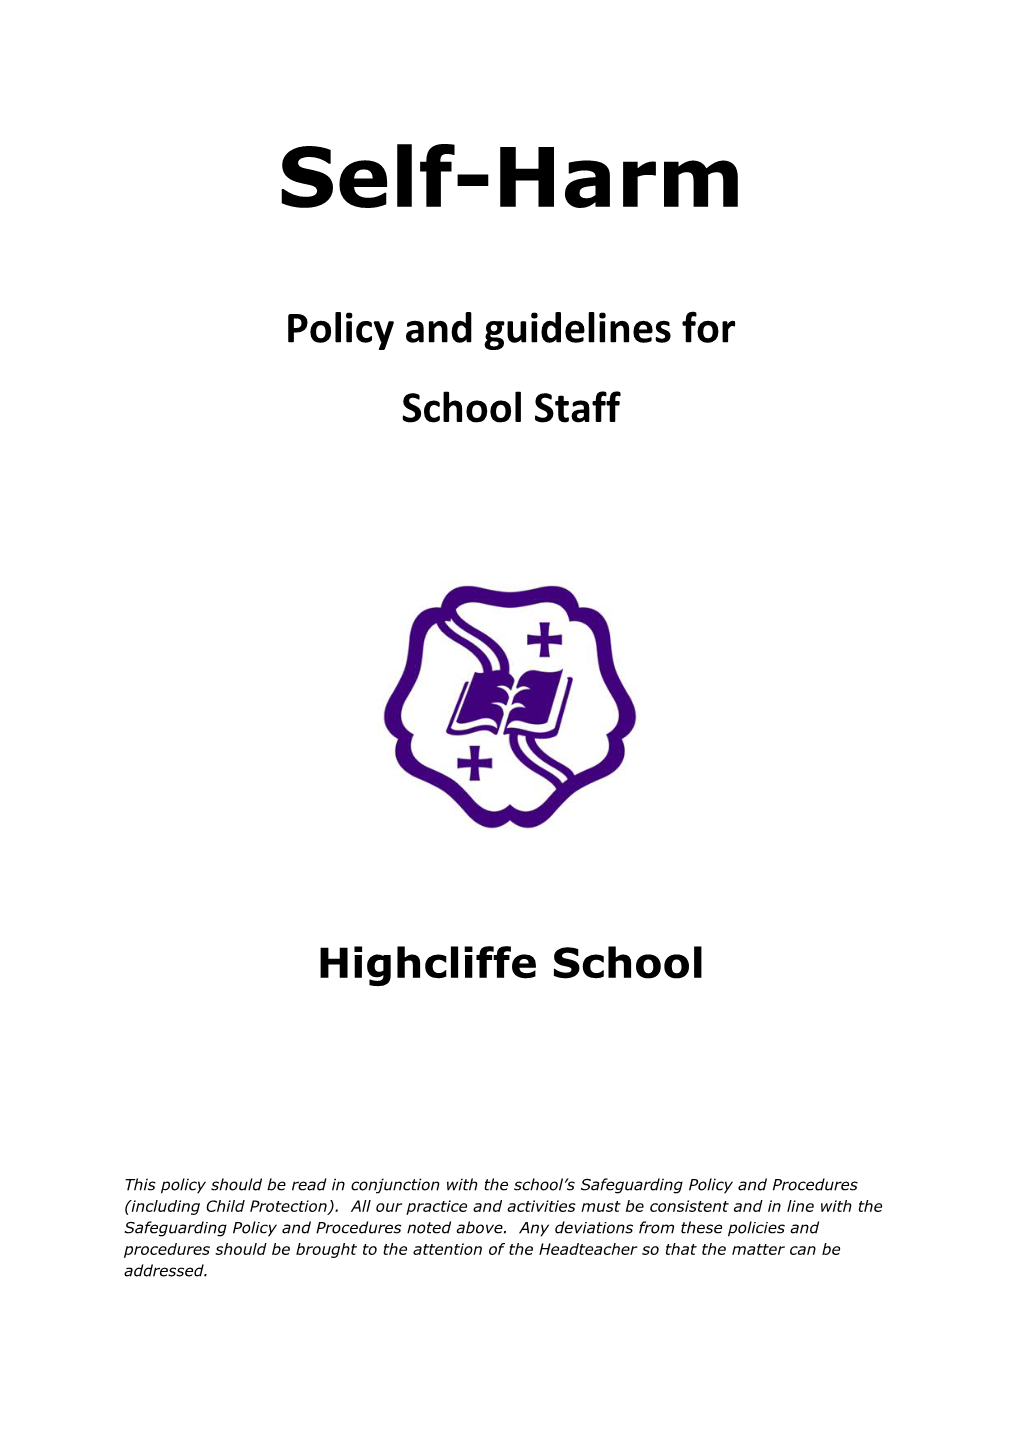 Policy and Guidelines For